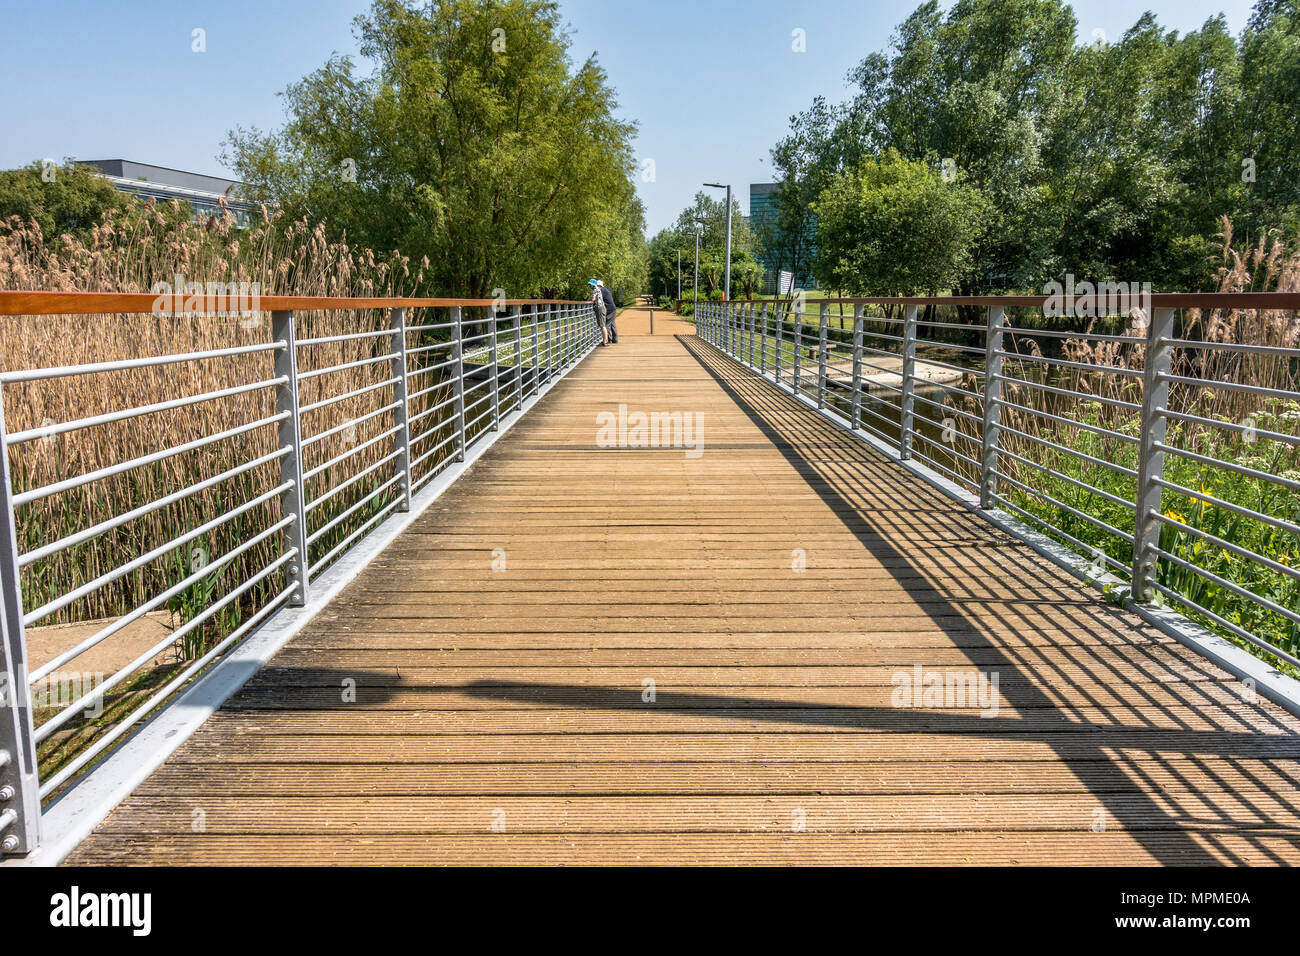 A bridge across a lake at Green Park Business Park in Reading, UK. Stock Photo